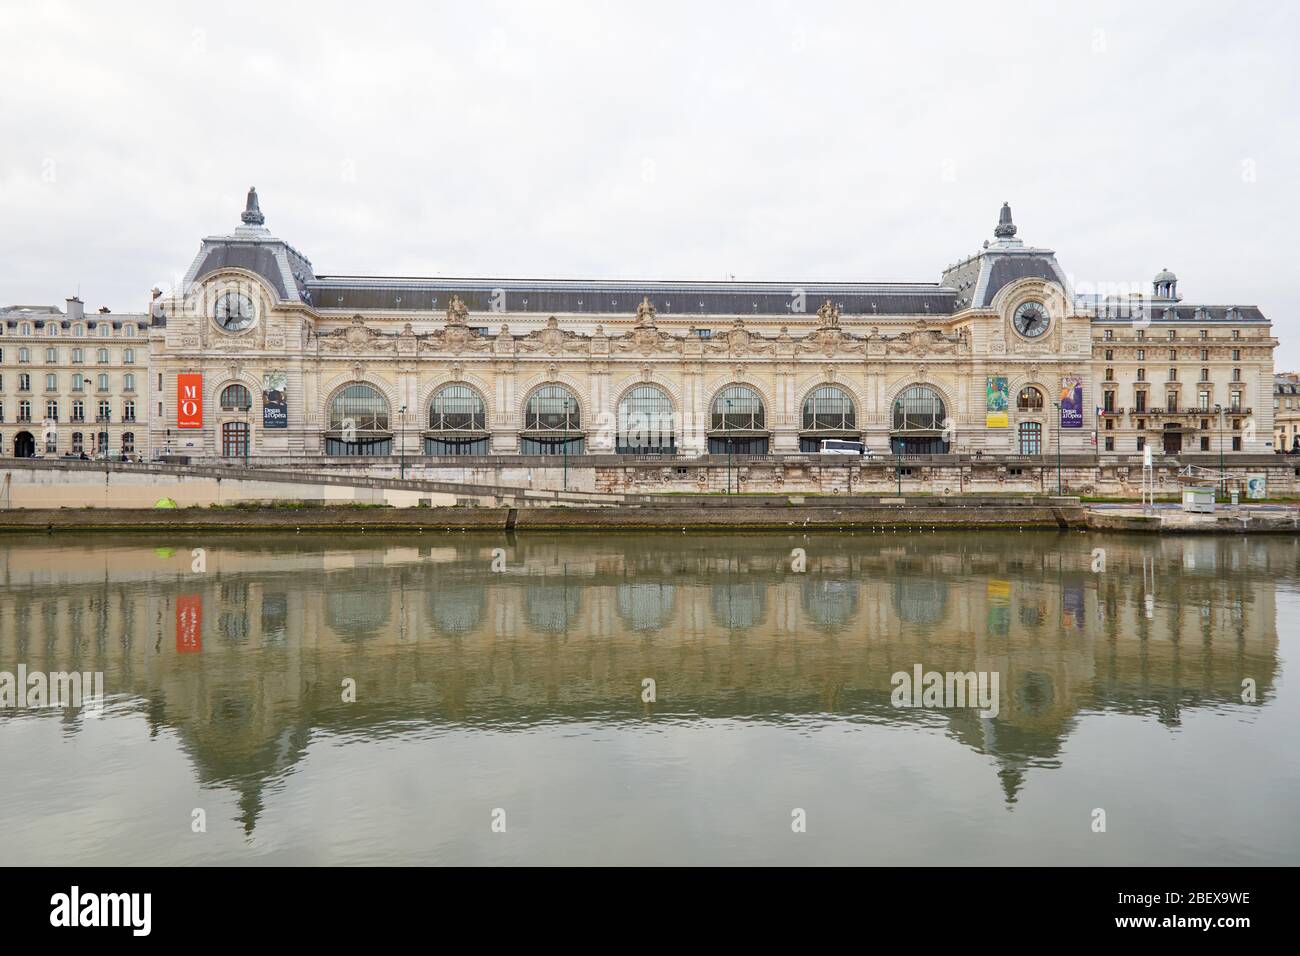 PARIS, FRANCE - NOVEMBER 8, 2019: Gare D'Orsay or Orsay museum building frontal view and Seine river in a cloudy day in Paris Stock Photo